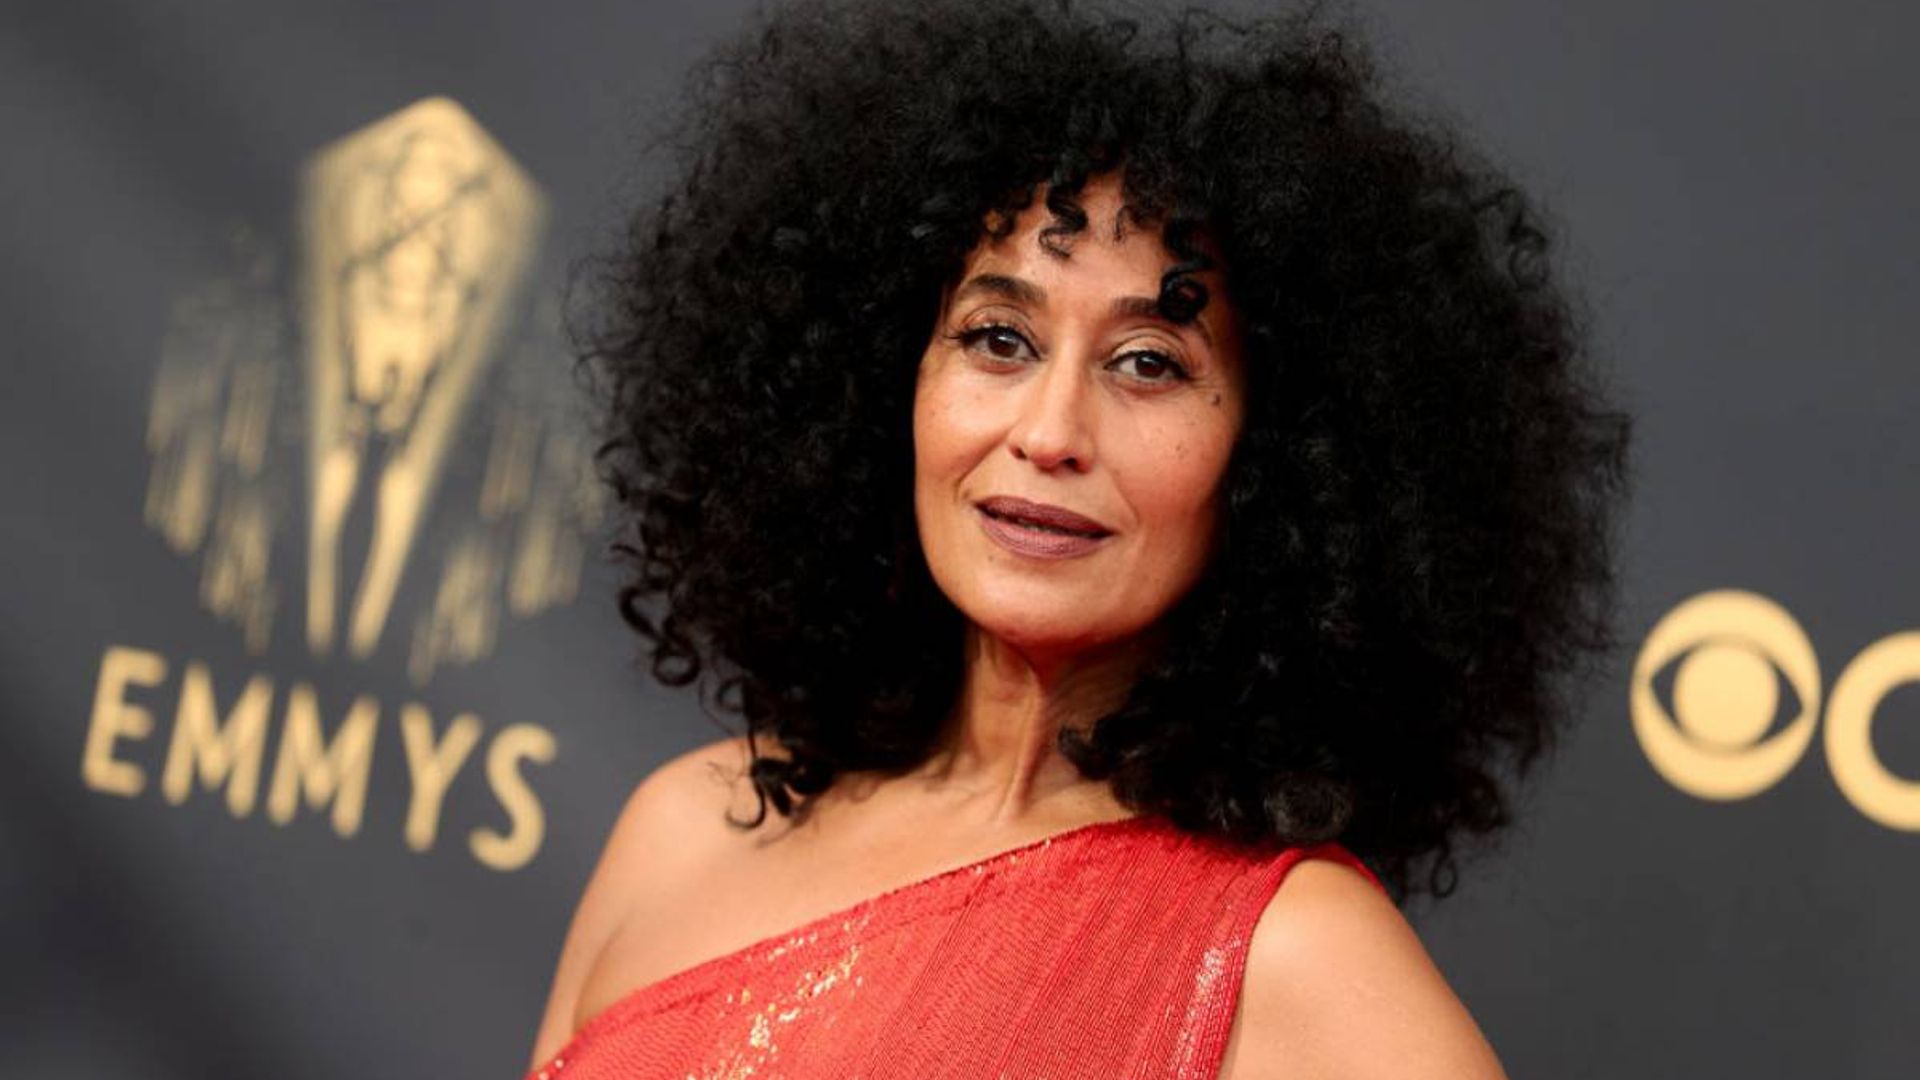 Tracee Ellis Ross turns up the wow factor with a brand new look